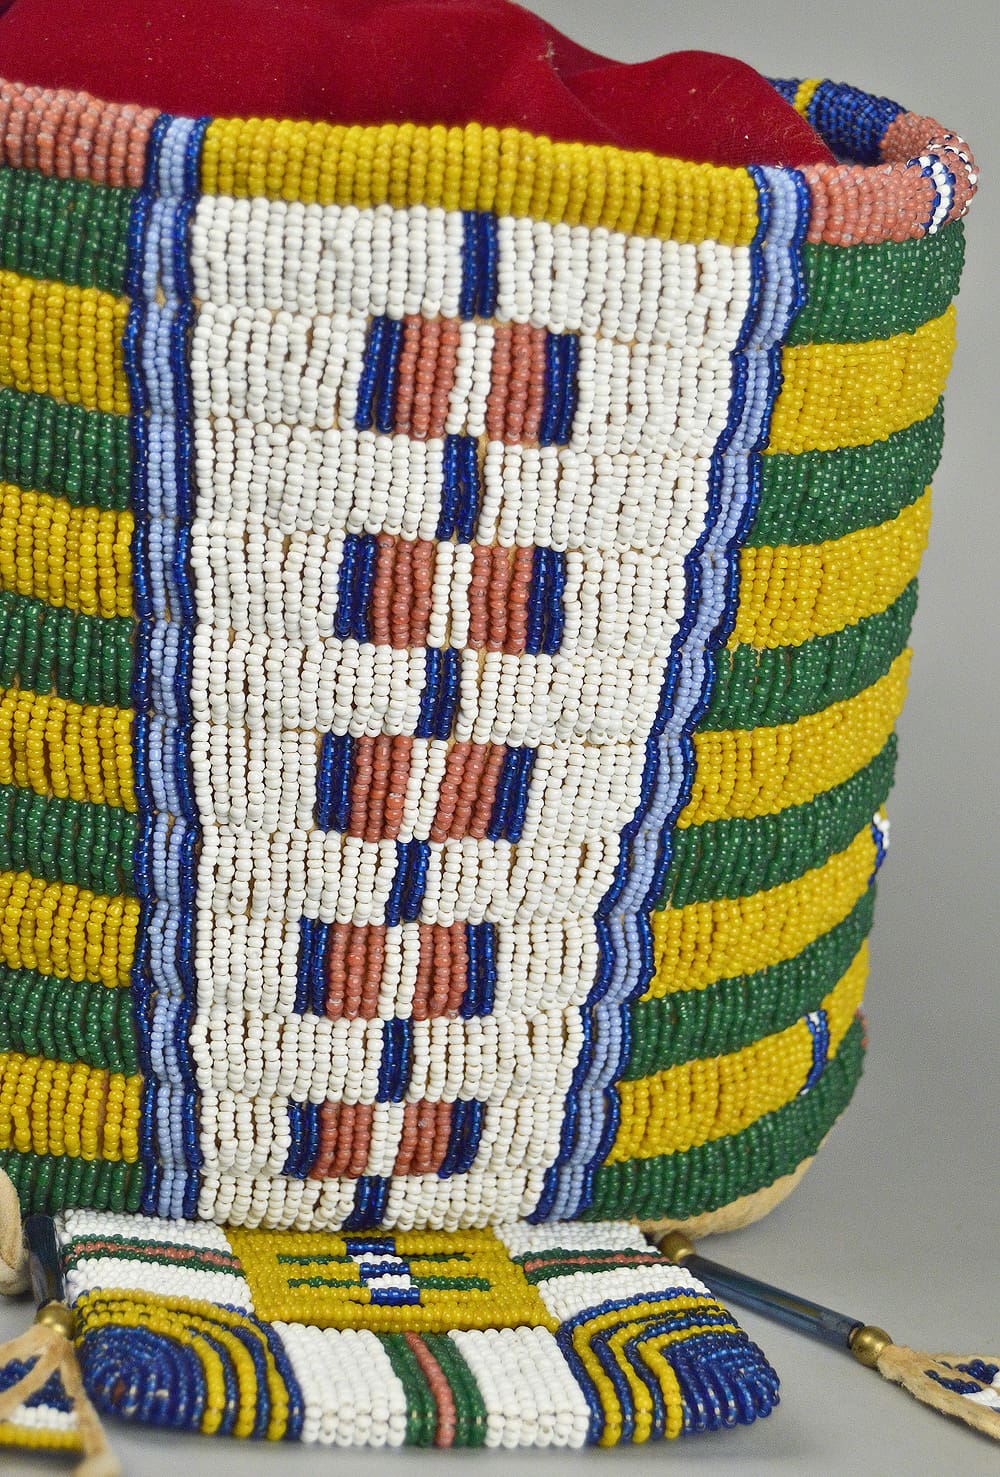 Southern Cheyenne Beaded Cradle Reproduction